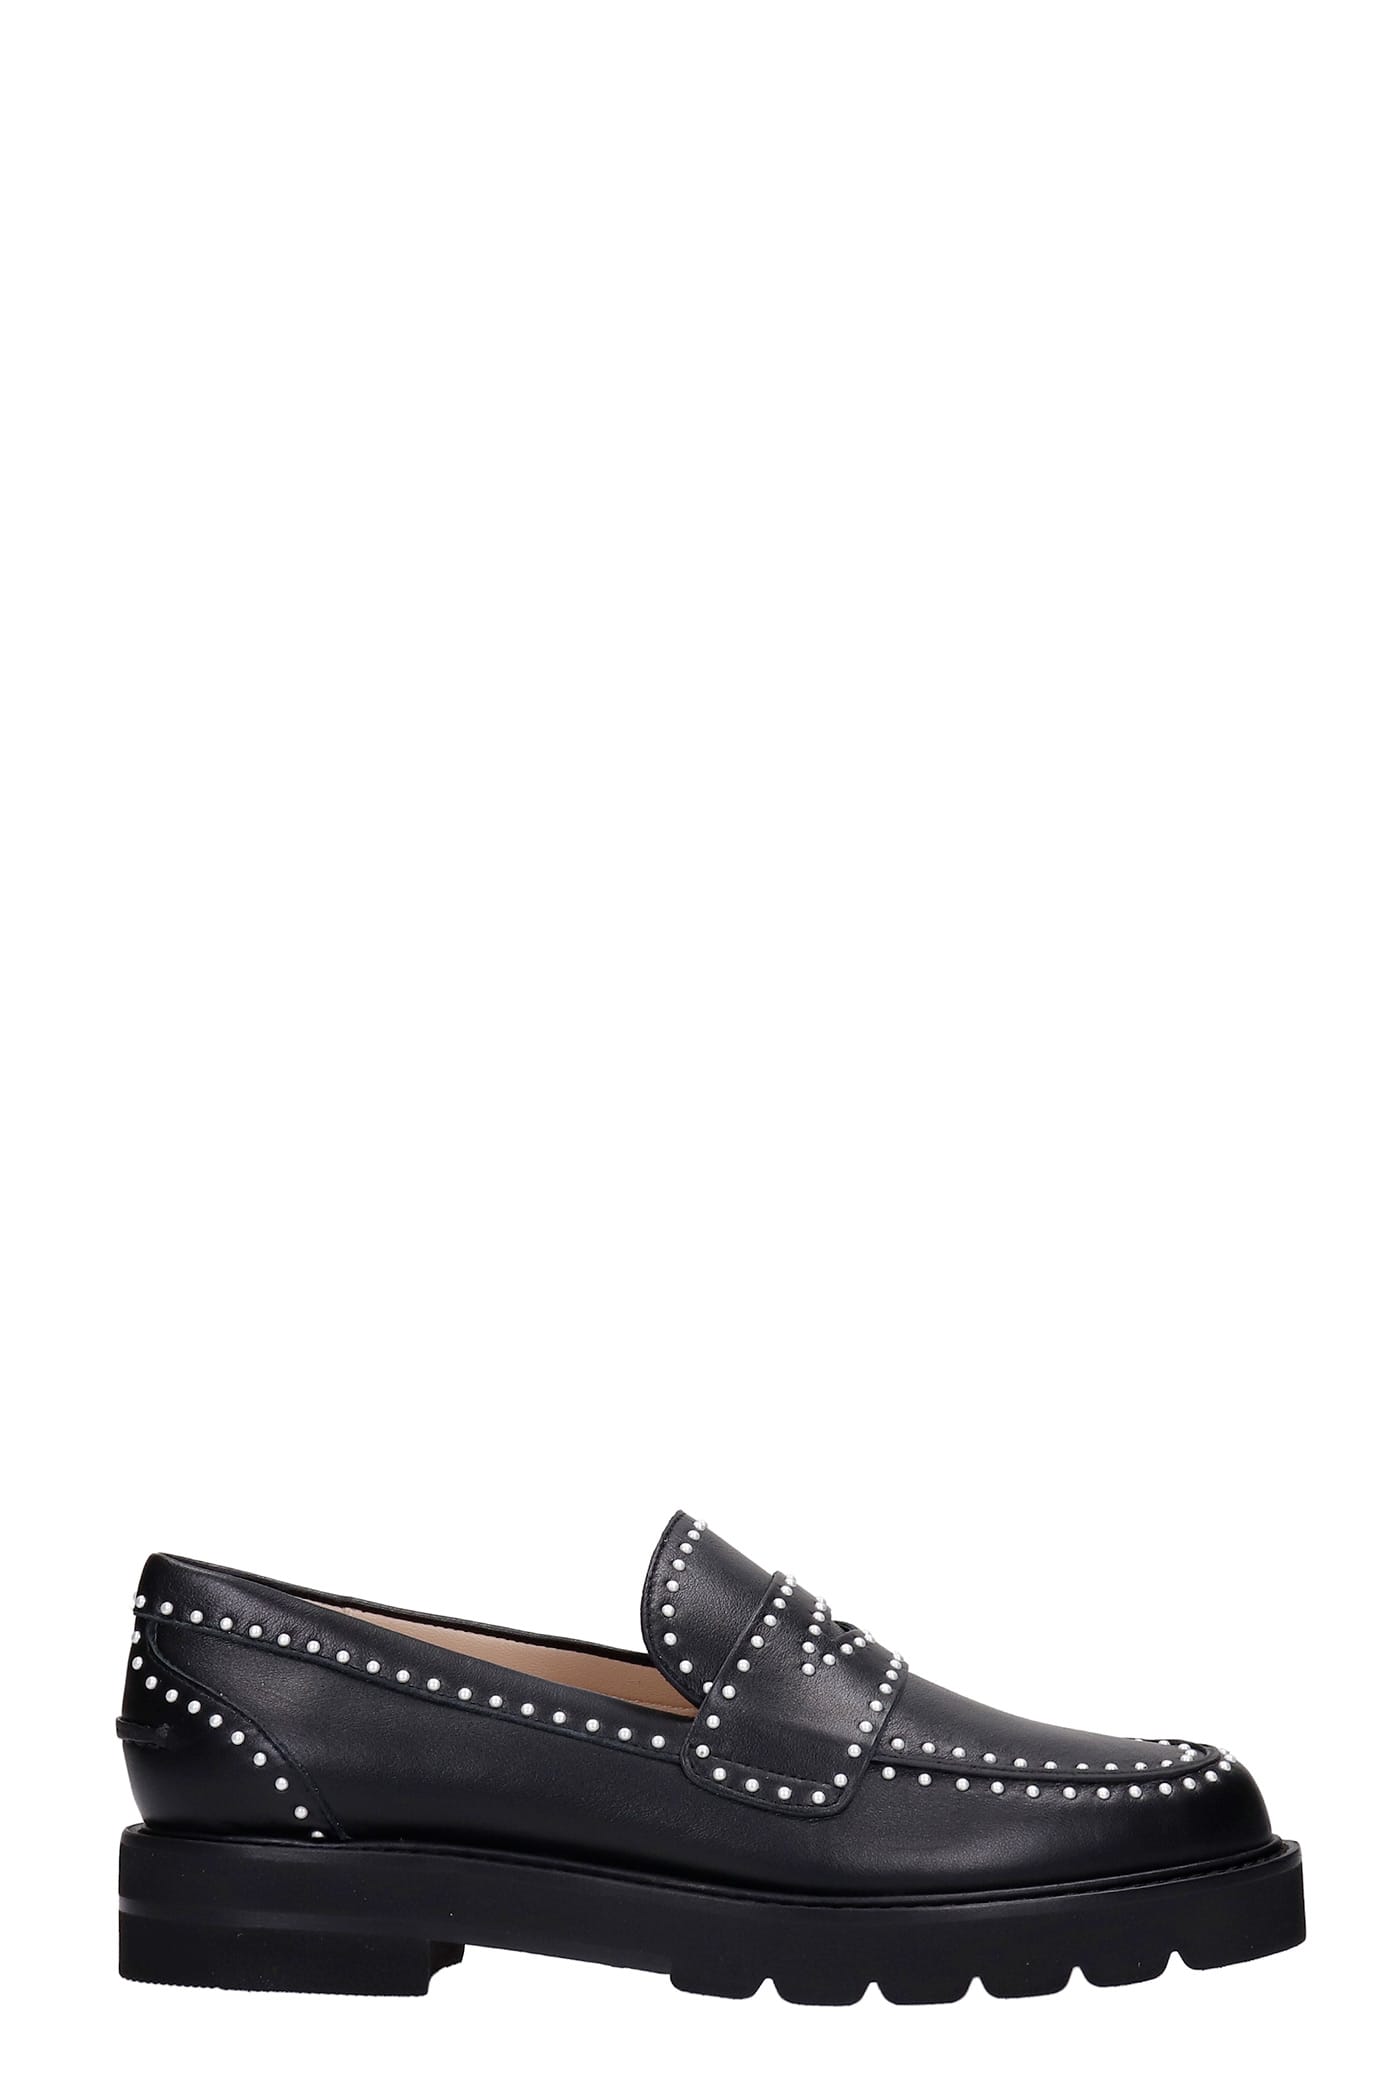 Buy Stuart Weitzman Parker Lif Loafers In Black Leather online, shop Stuart Weitzman shoes with free shipping